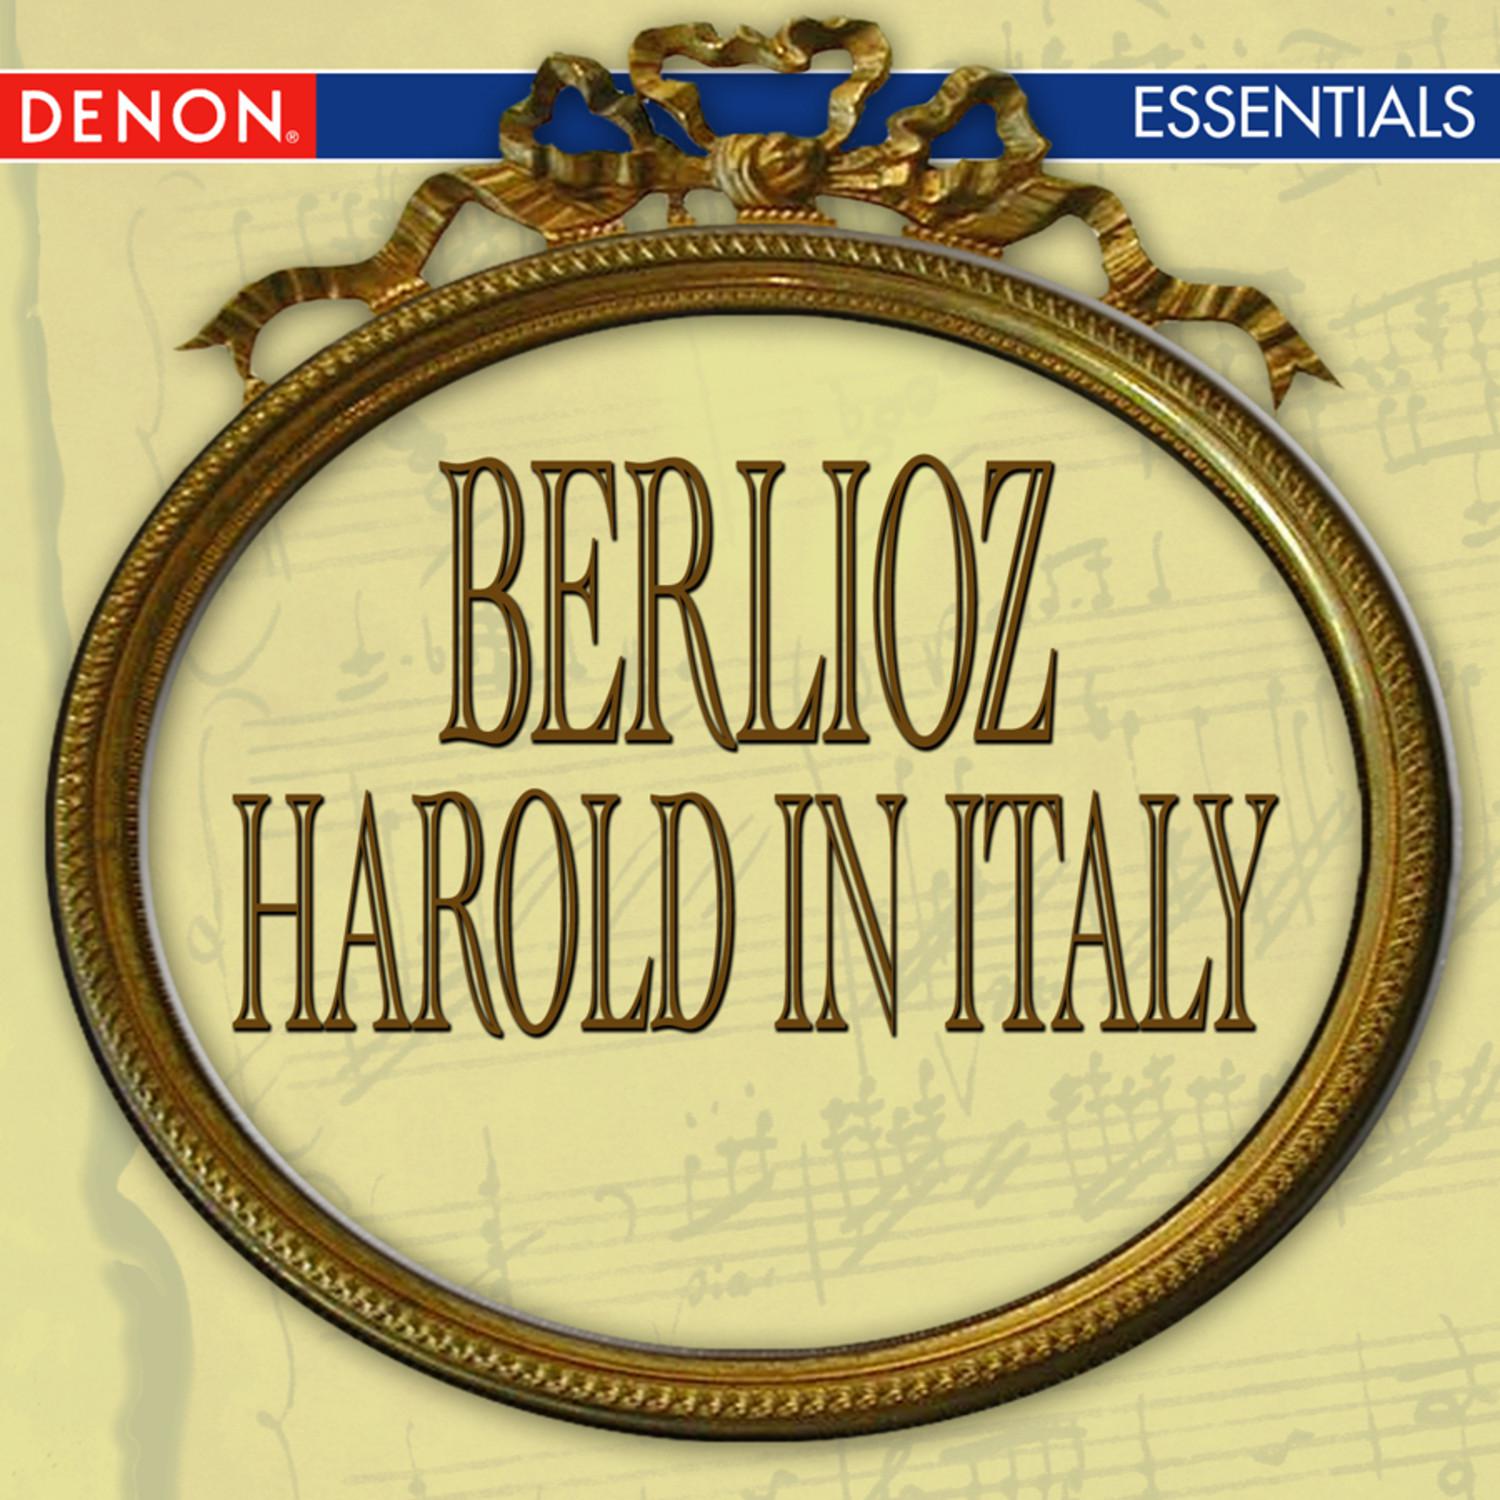 Harold in Italy Symphony for Viola & Orchestra in four Parts: IV. The Robbers Orgies - Allegro frenetico